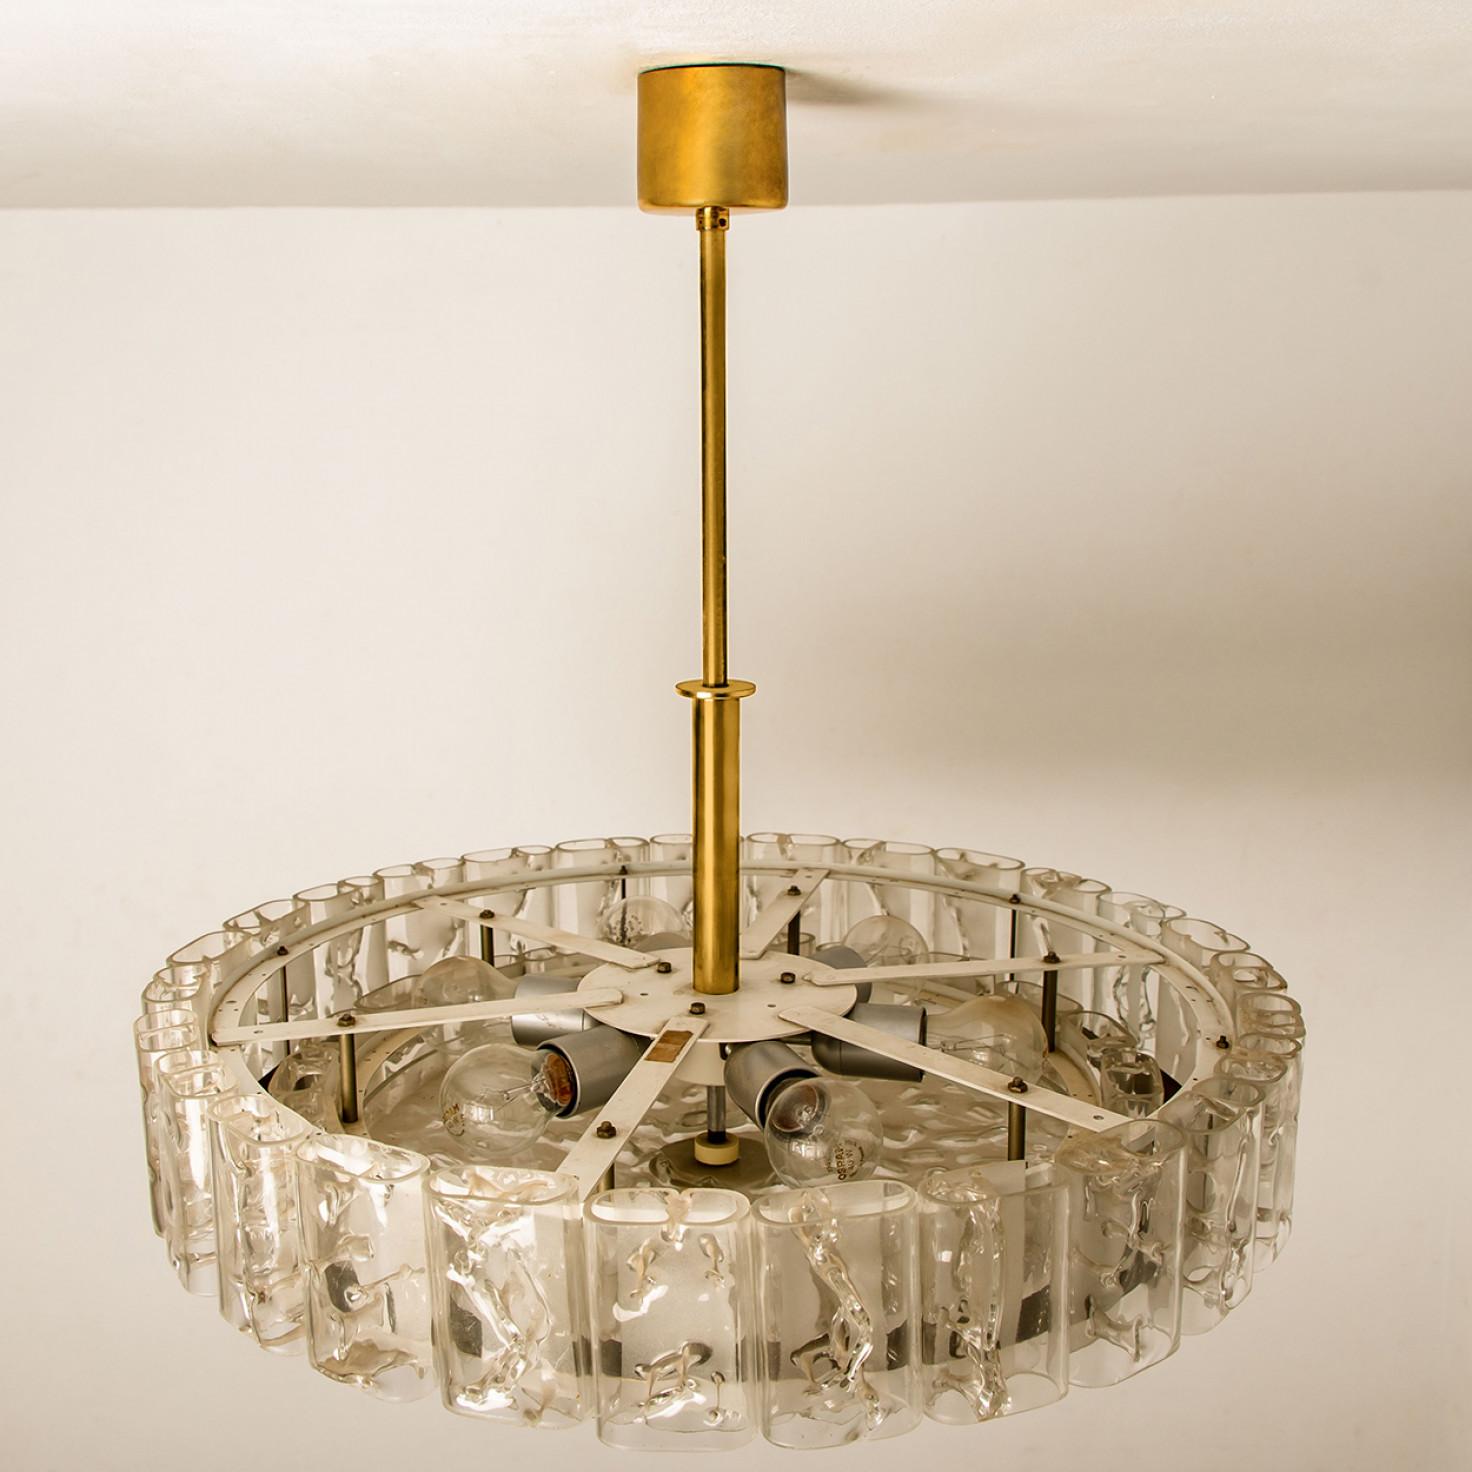 Other Large Glass and Brass Pendant by Doria, 1970s For Sale